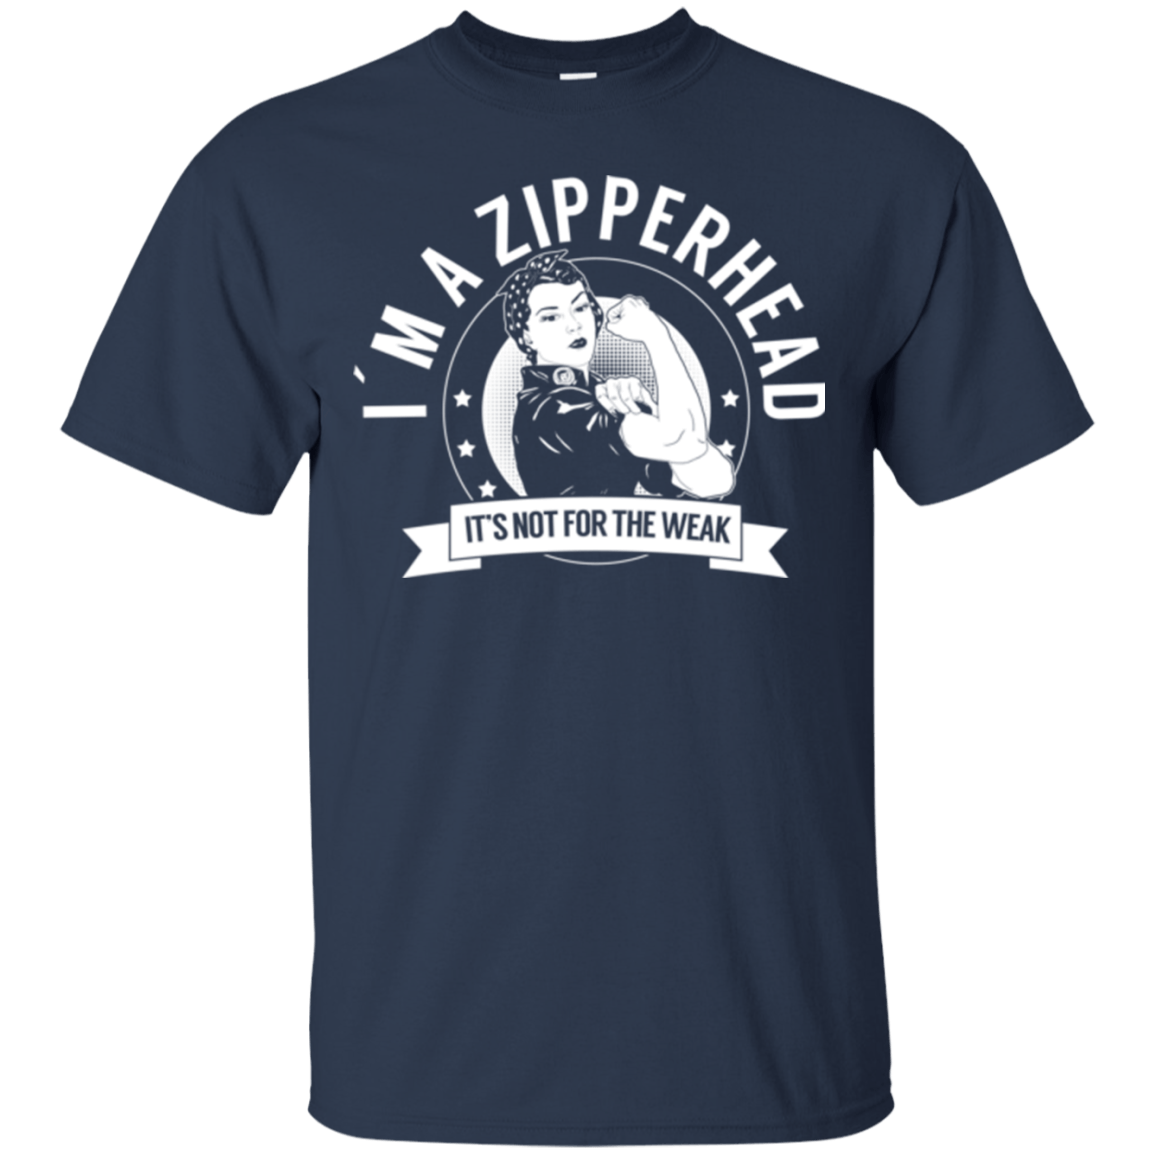 Zipperhead Not For The Weak Unisex Shirt - The Unchargeables